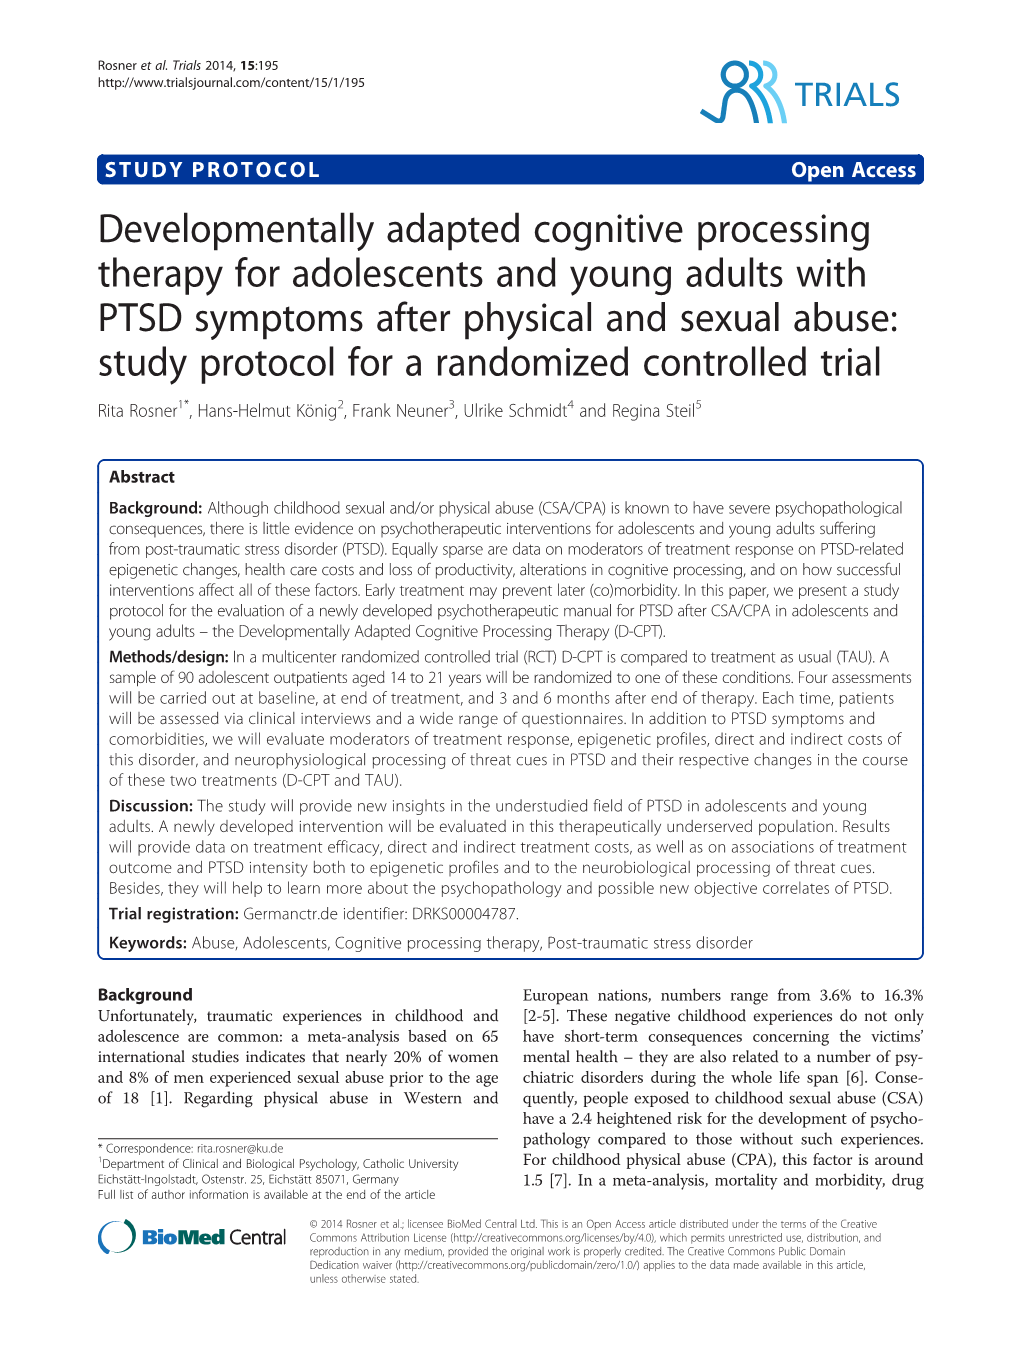 Developmentally Adapted Cognitive Processing Therapy for Adolescents